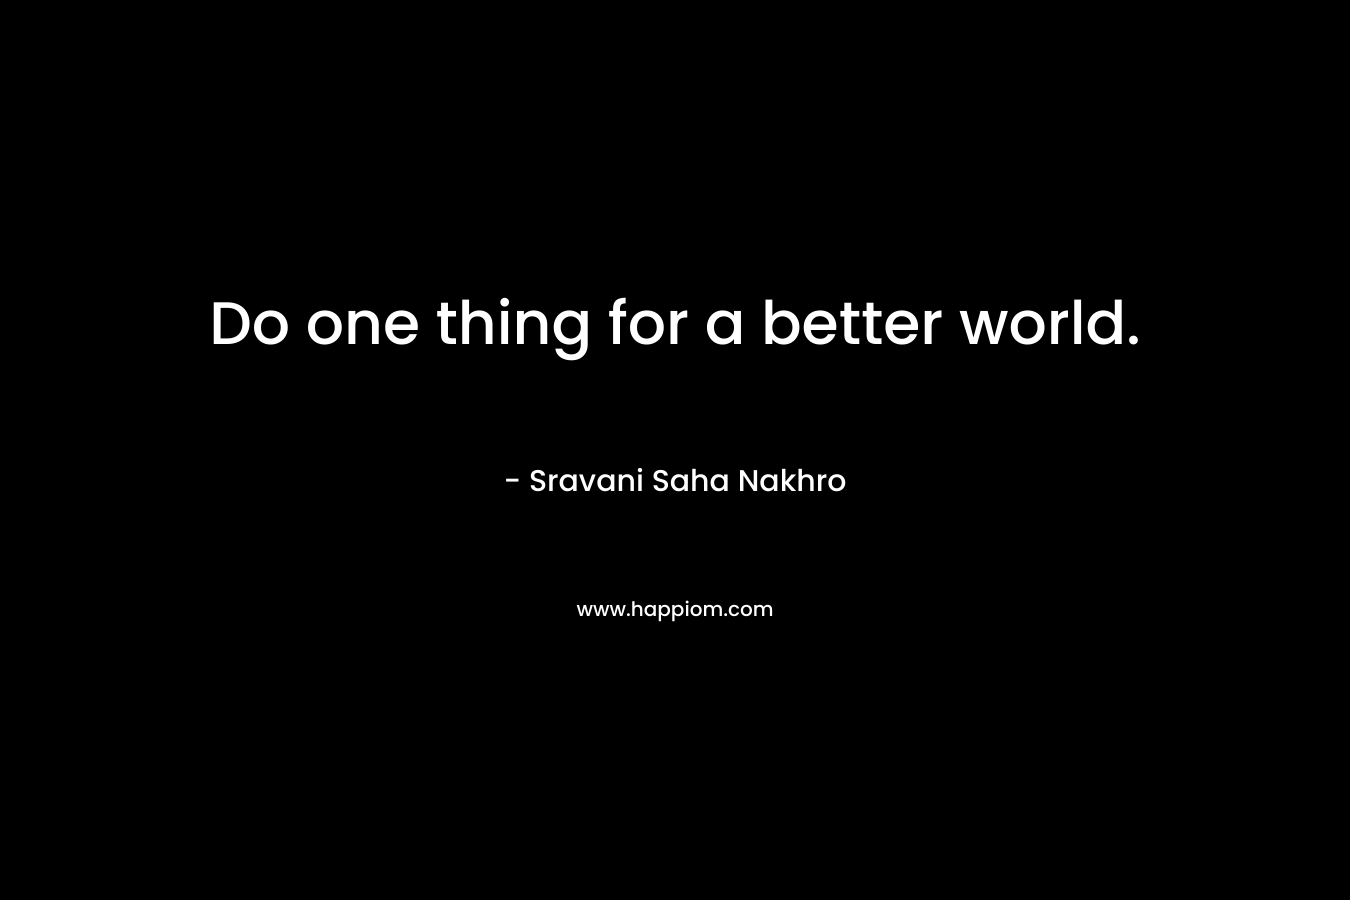 Do one thing for a better world.